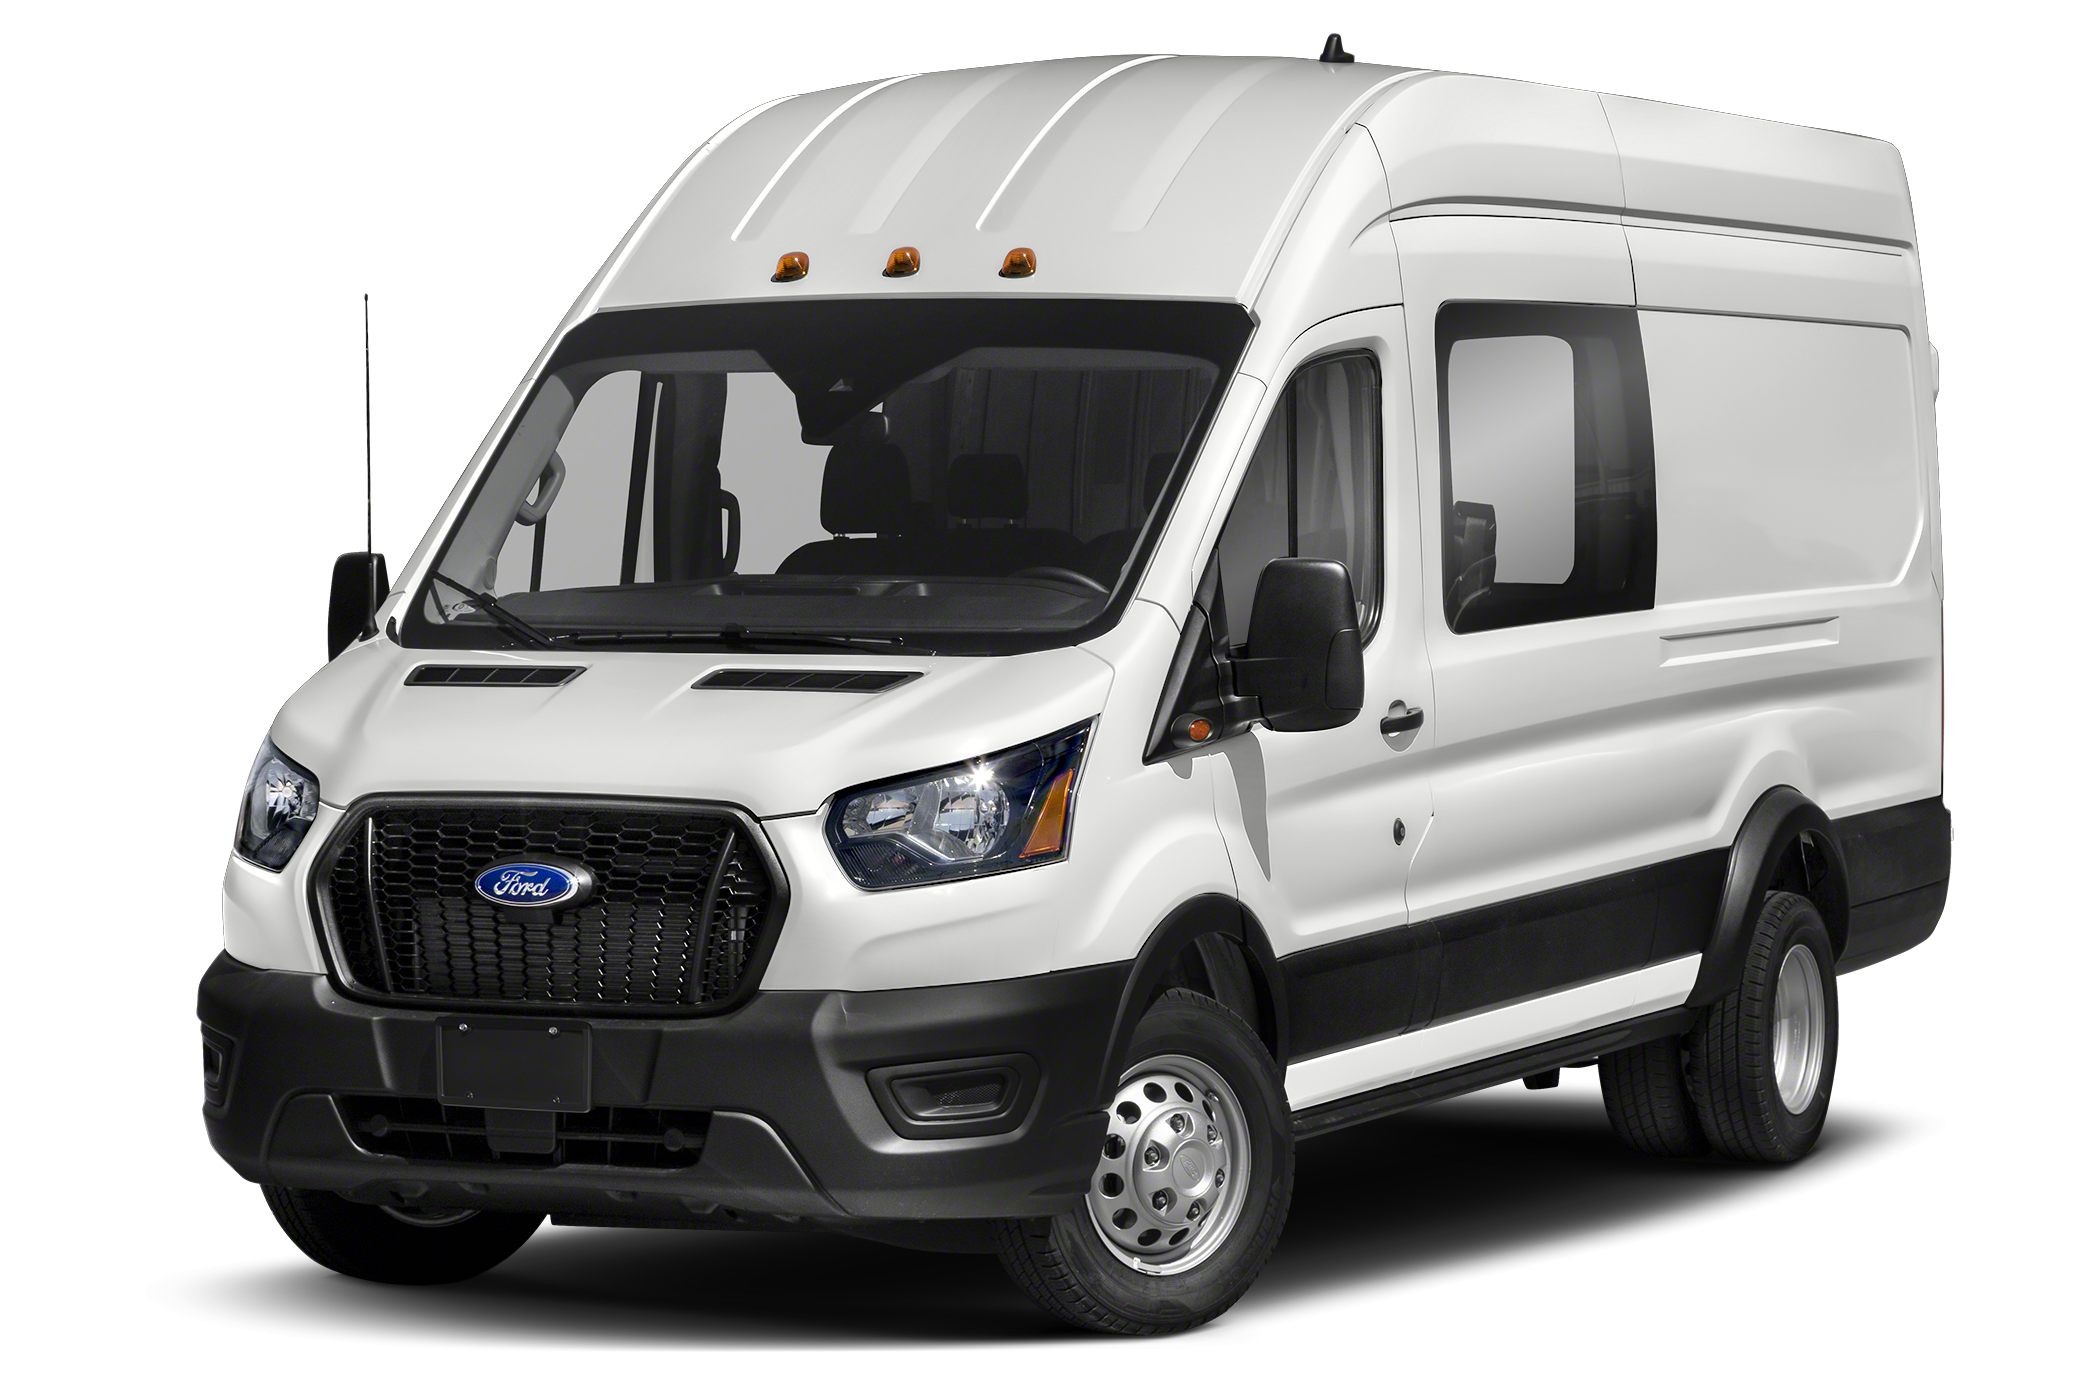 2021 Ford Transit-250 Crew Base All-Wheel Drive Van in. WB and Prices